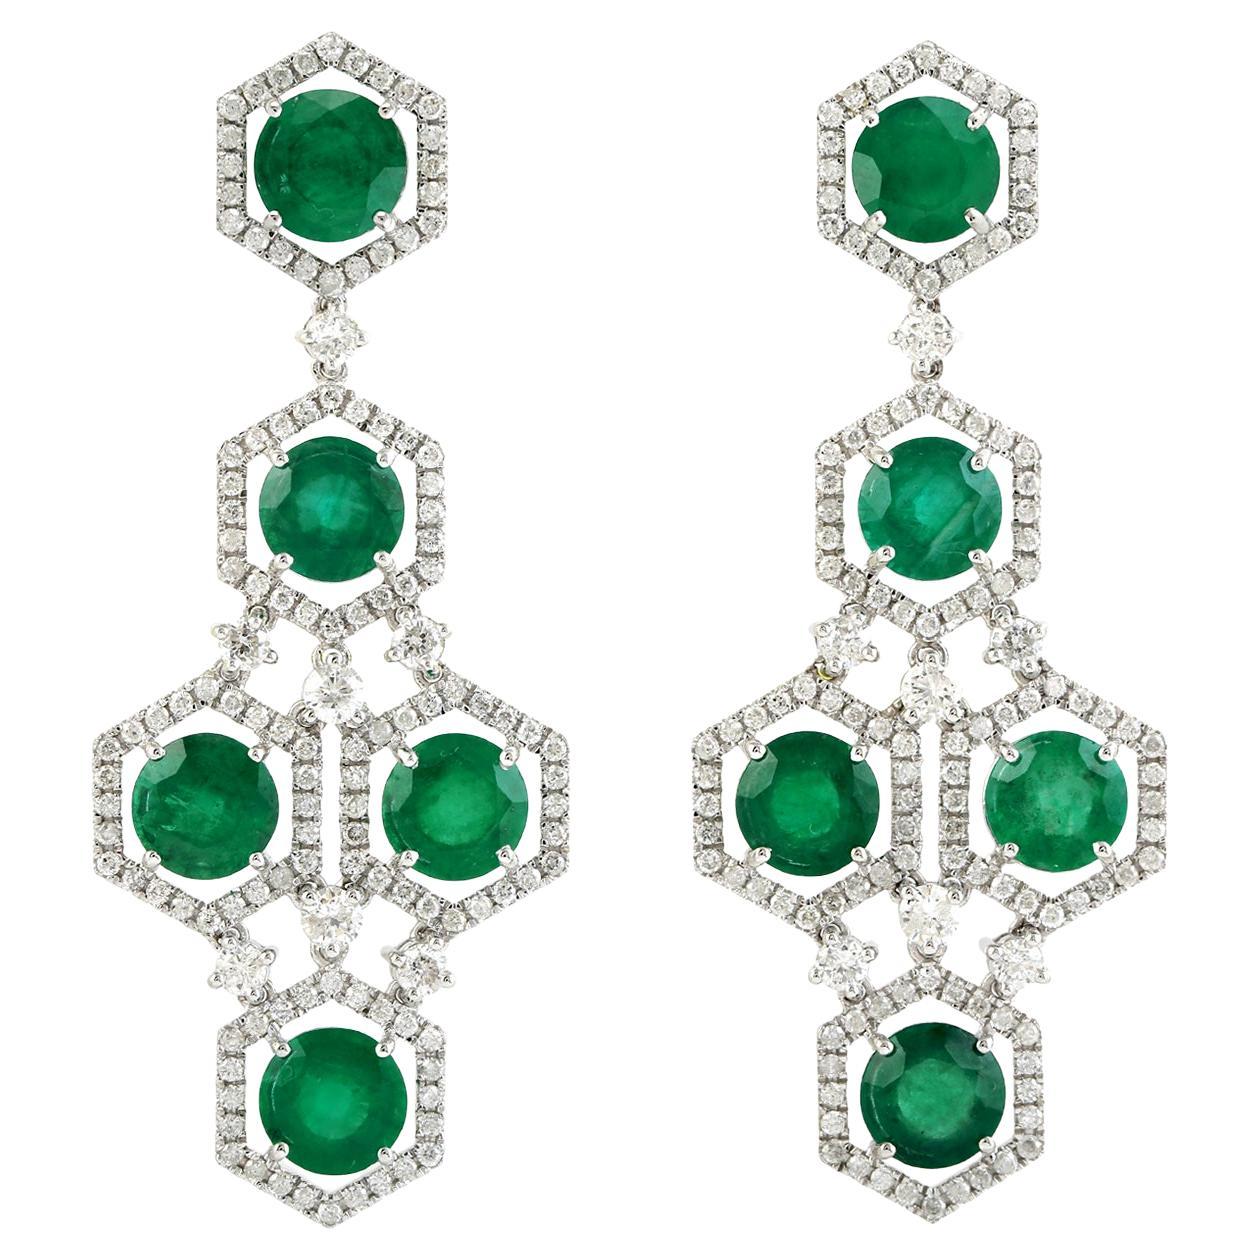 Round Emerald Long Earrings With Diamonds Made In 18k White Gold For Sale